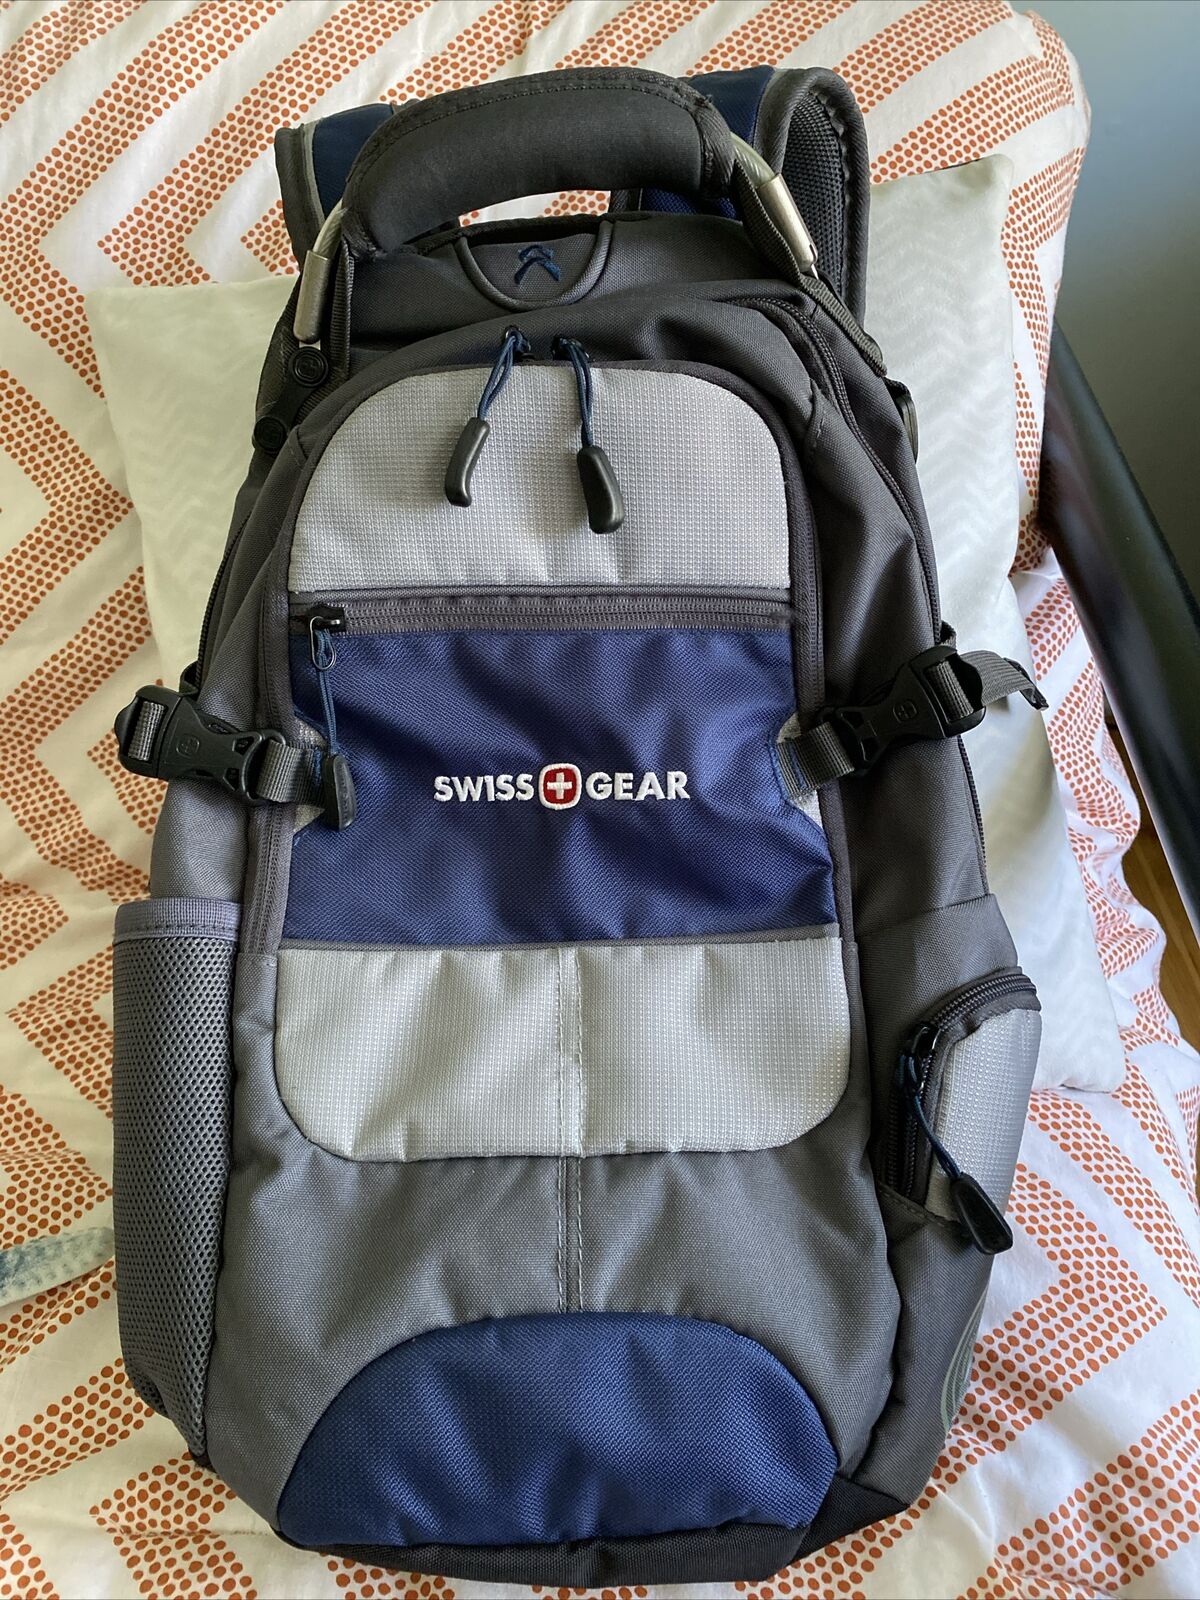 SWISS GEAR City Pack New Backpack Airflow Gray Blue Pockets Chest Strap - EUC